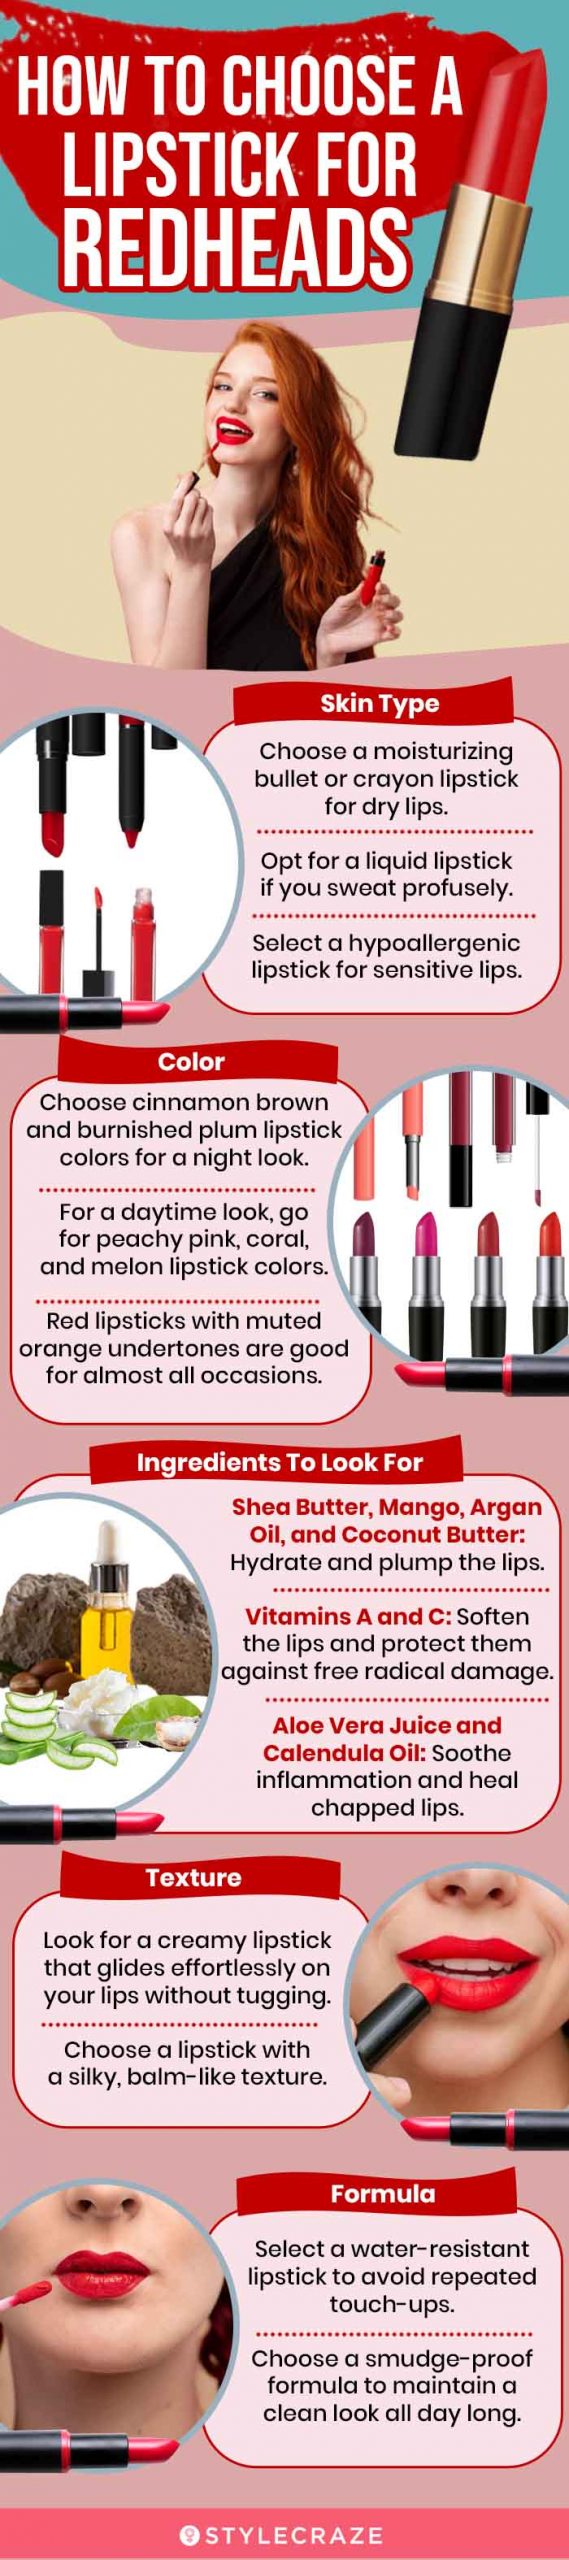 How To Choose Lipsticks For Redheads